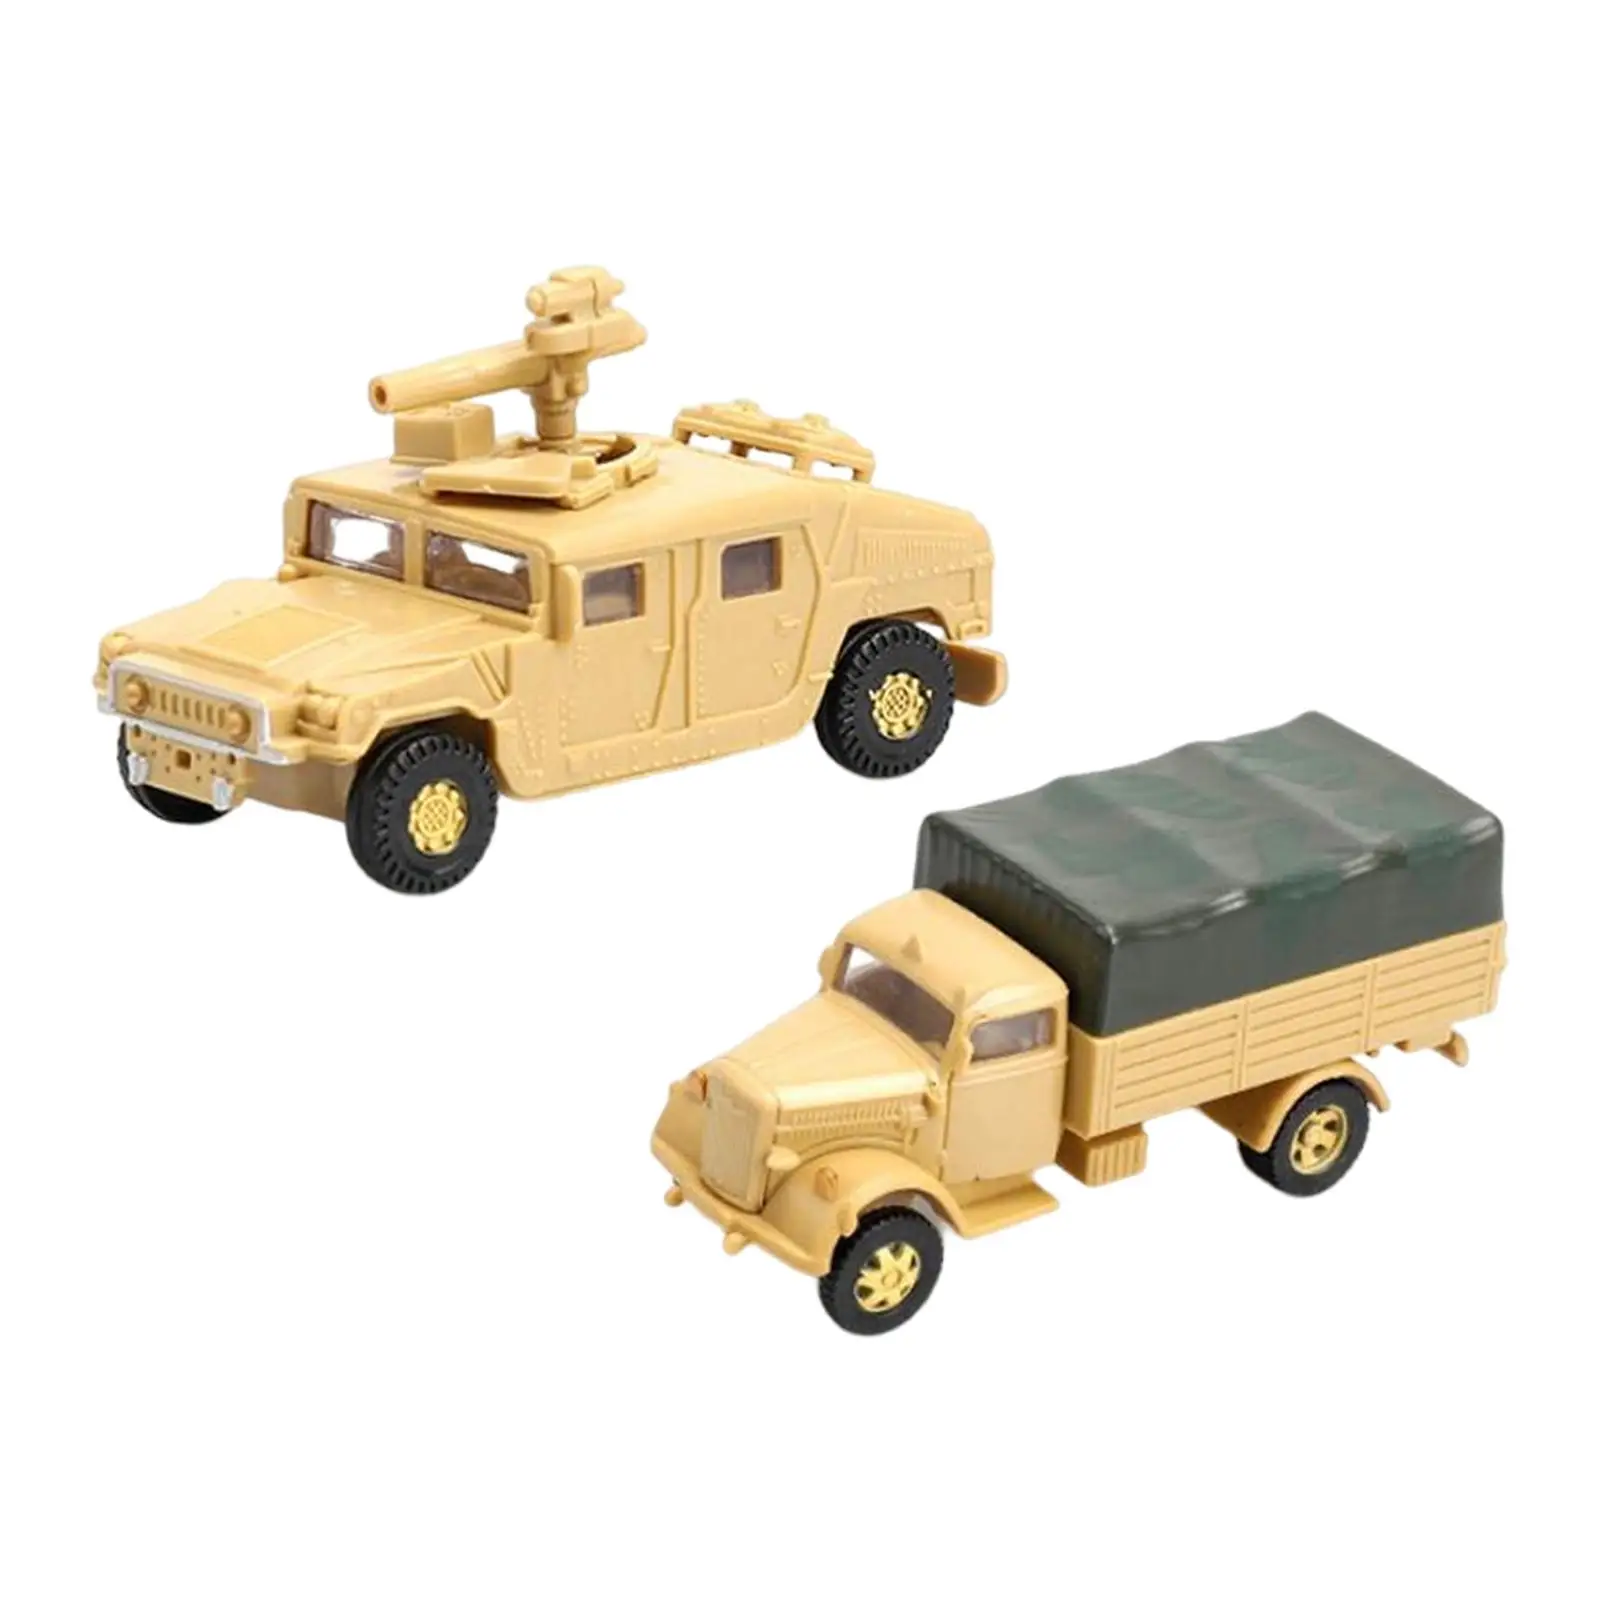 2Pcs Assembly Model Toy Car Transport Carrier Truck Playset Decorative Vehicle